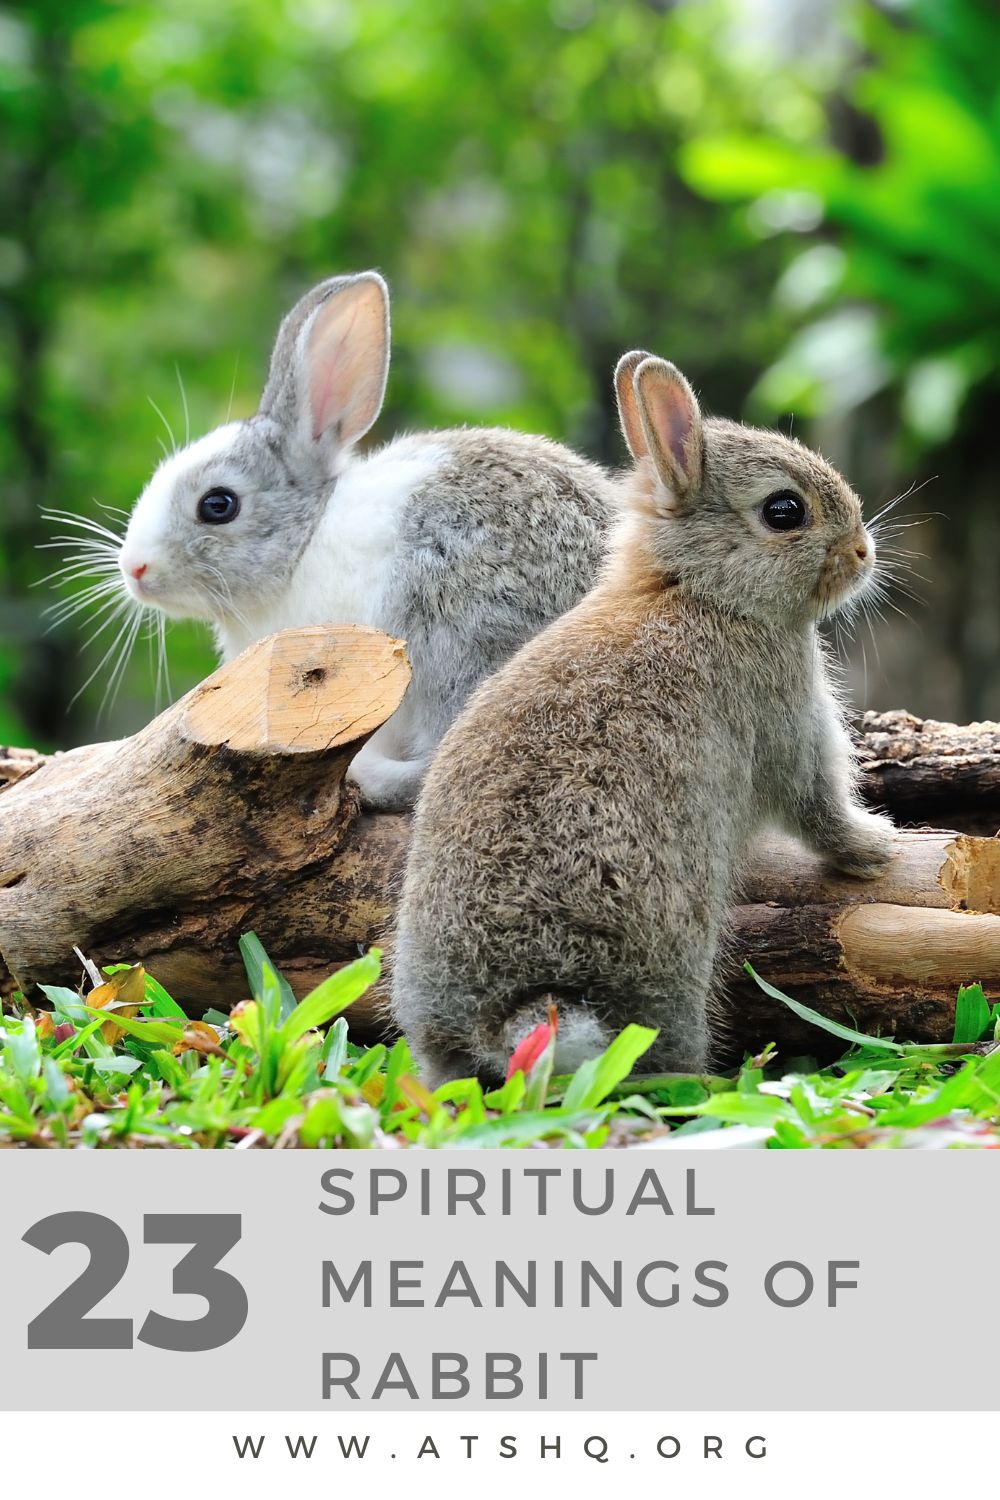 What Does Seeing Two Rabbits Mean?